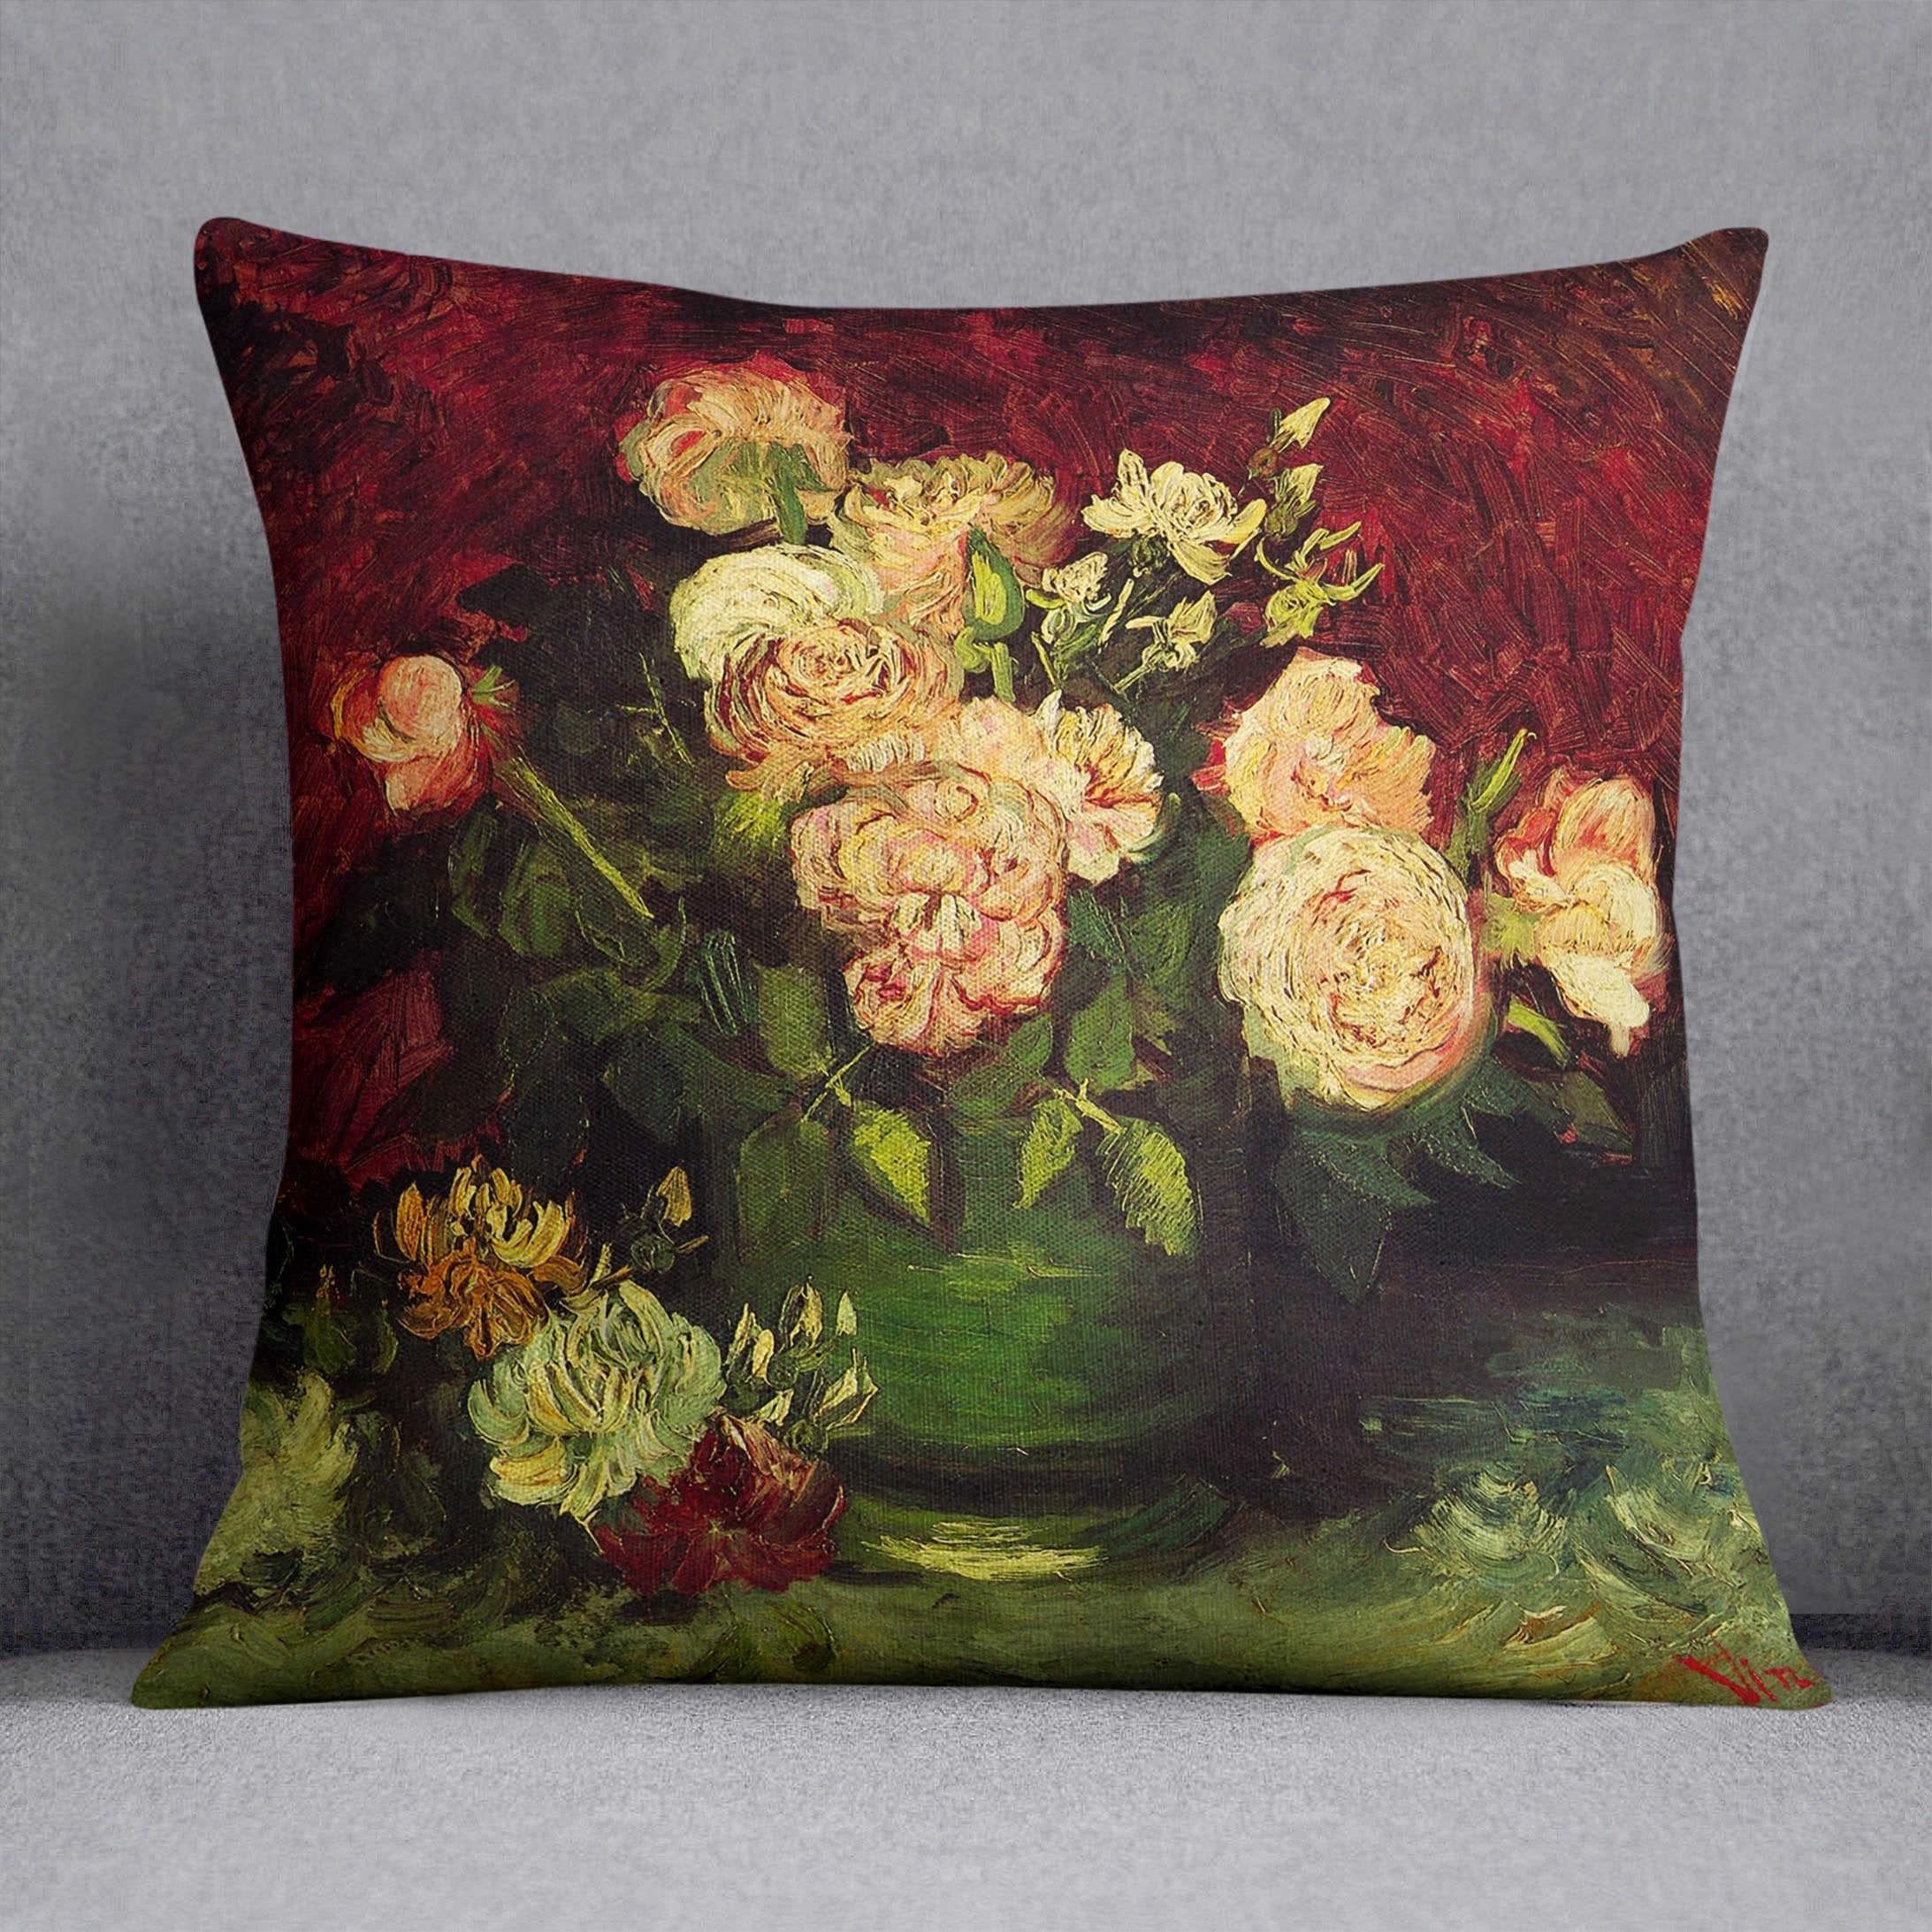 Bowl with Peonies and Roses by Van Gogh Throw Pillow